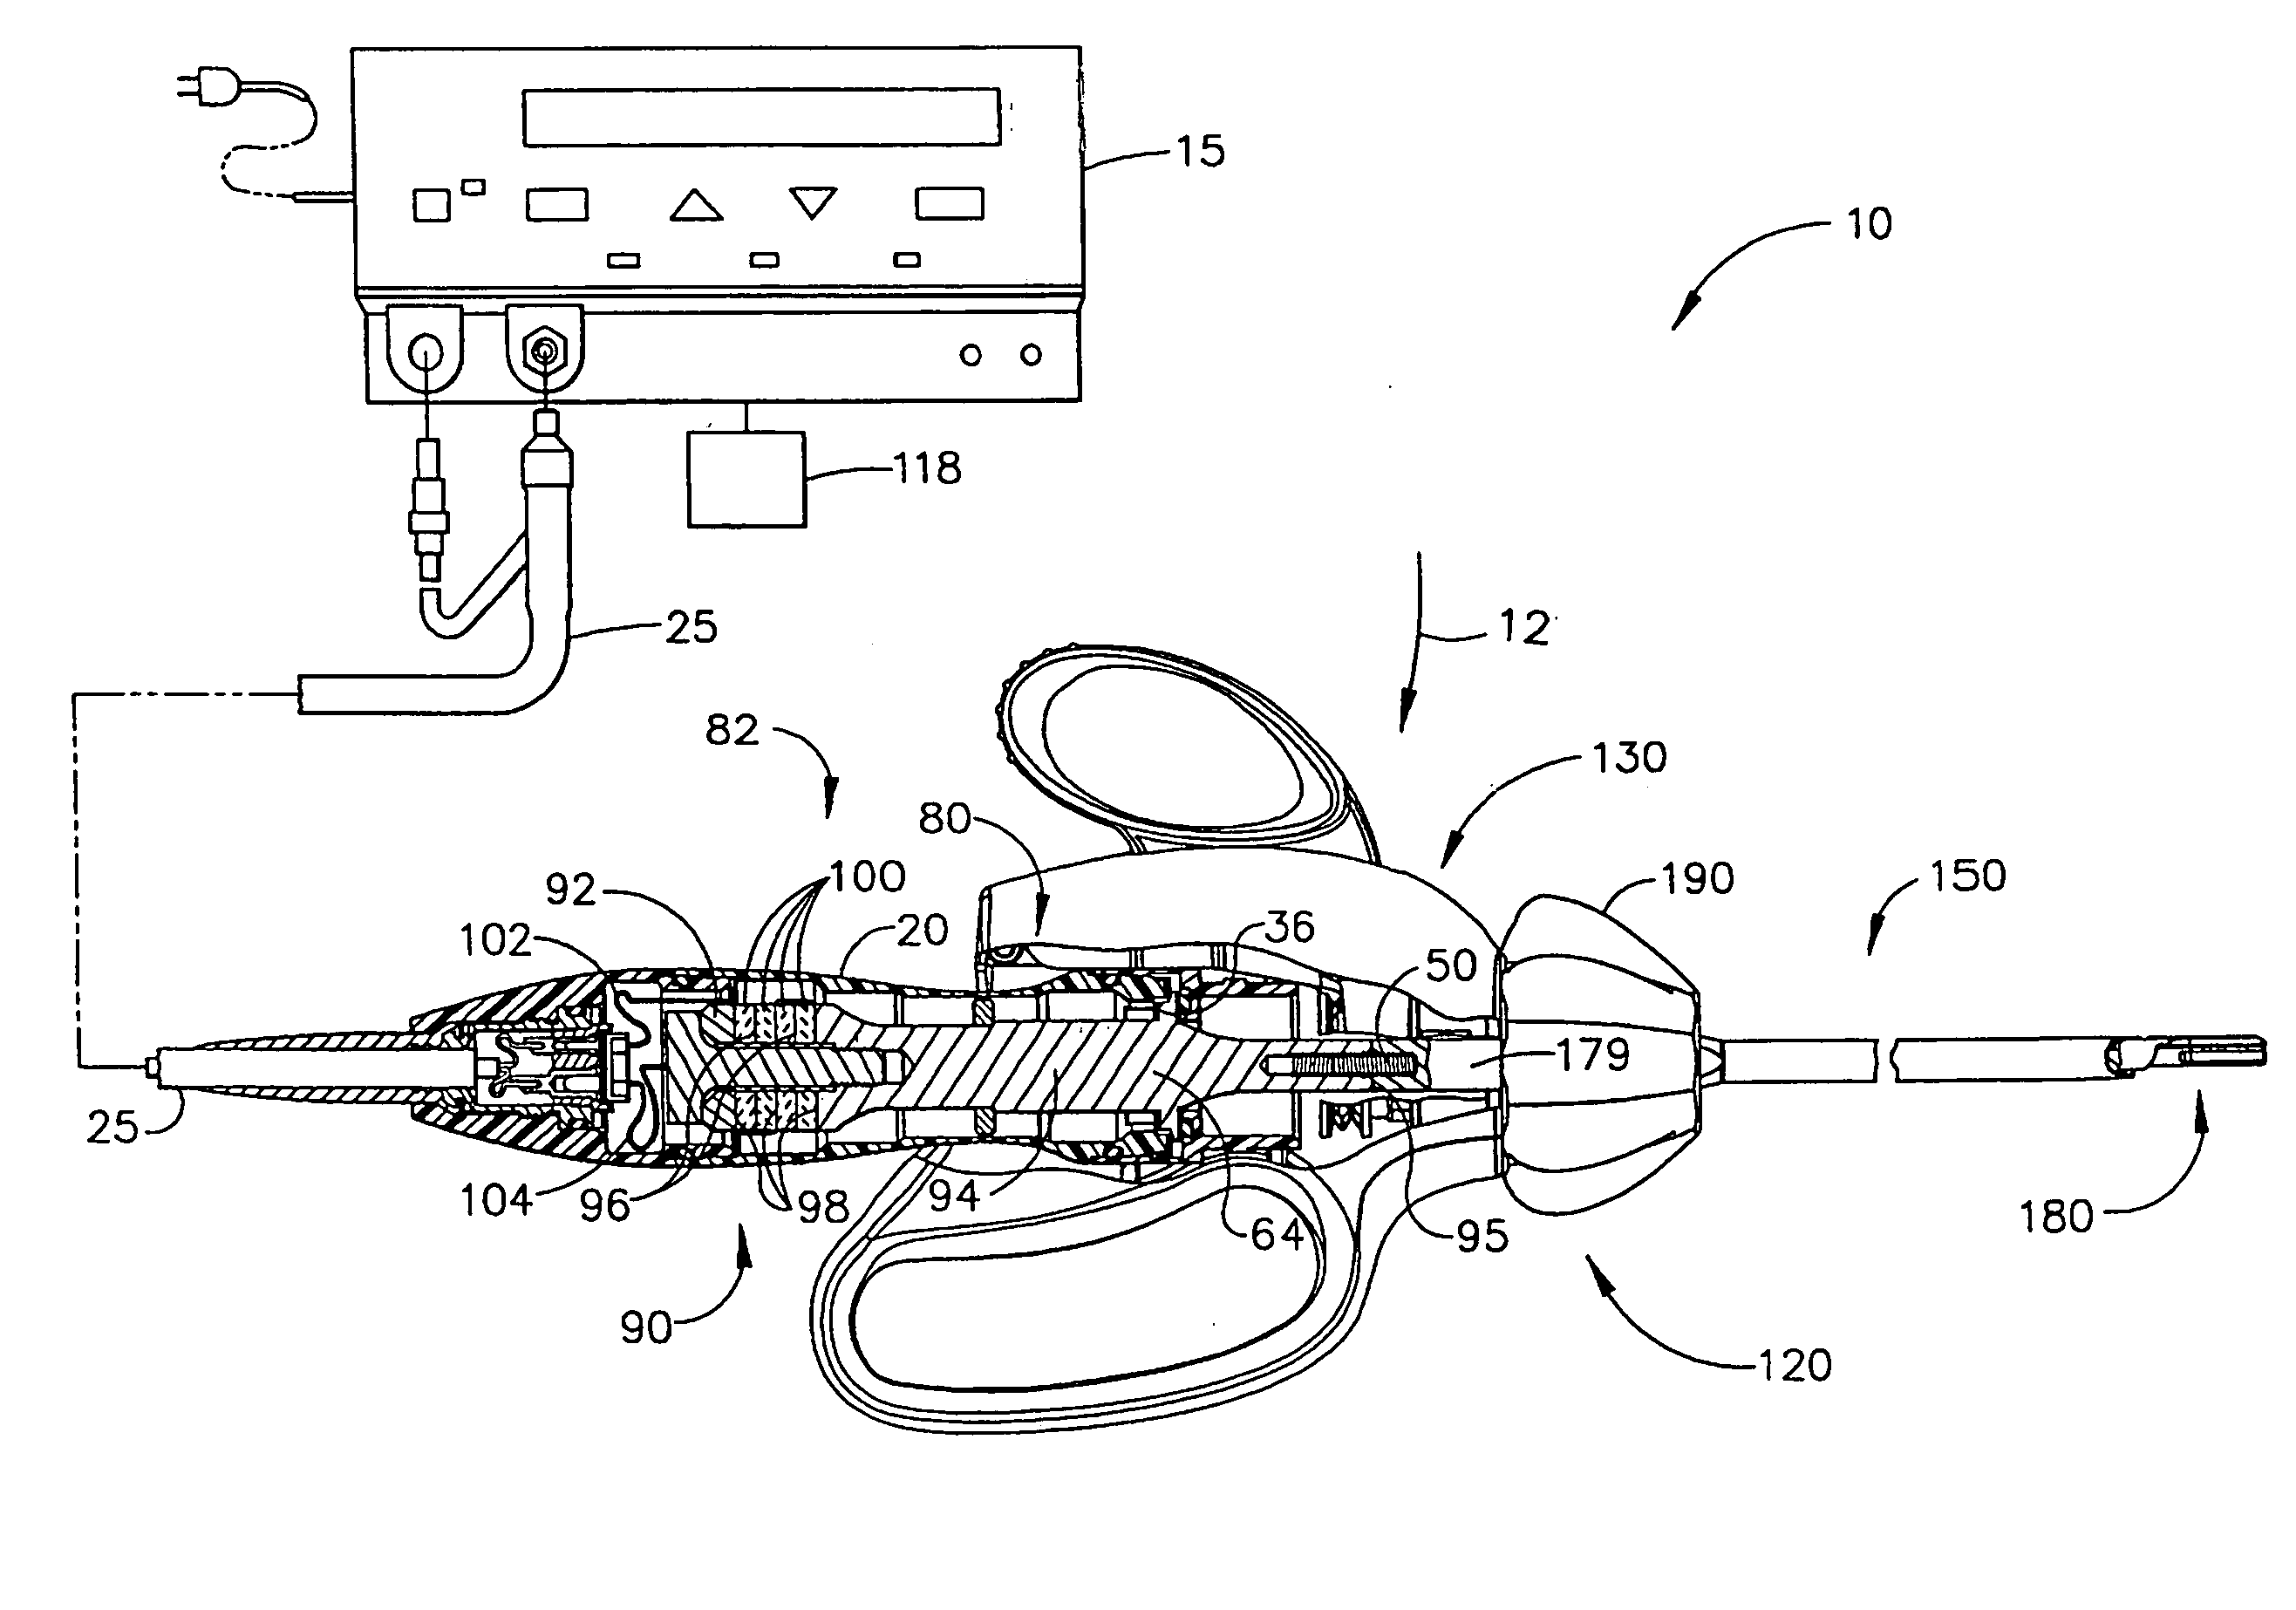 System for controlling ultrasonic clamping and cutting instruments